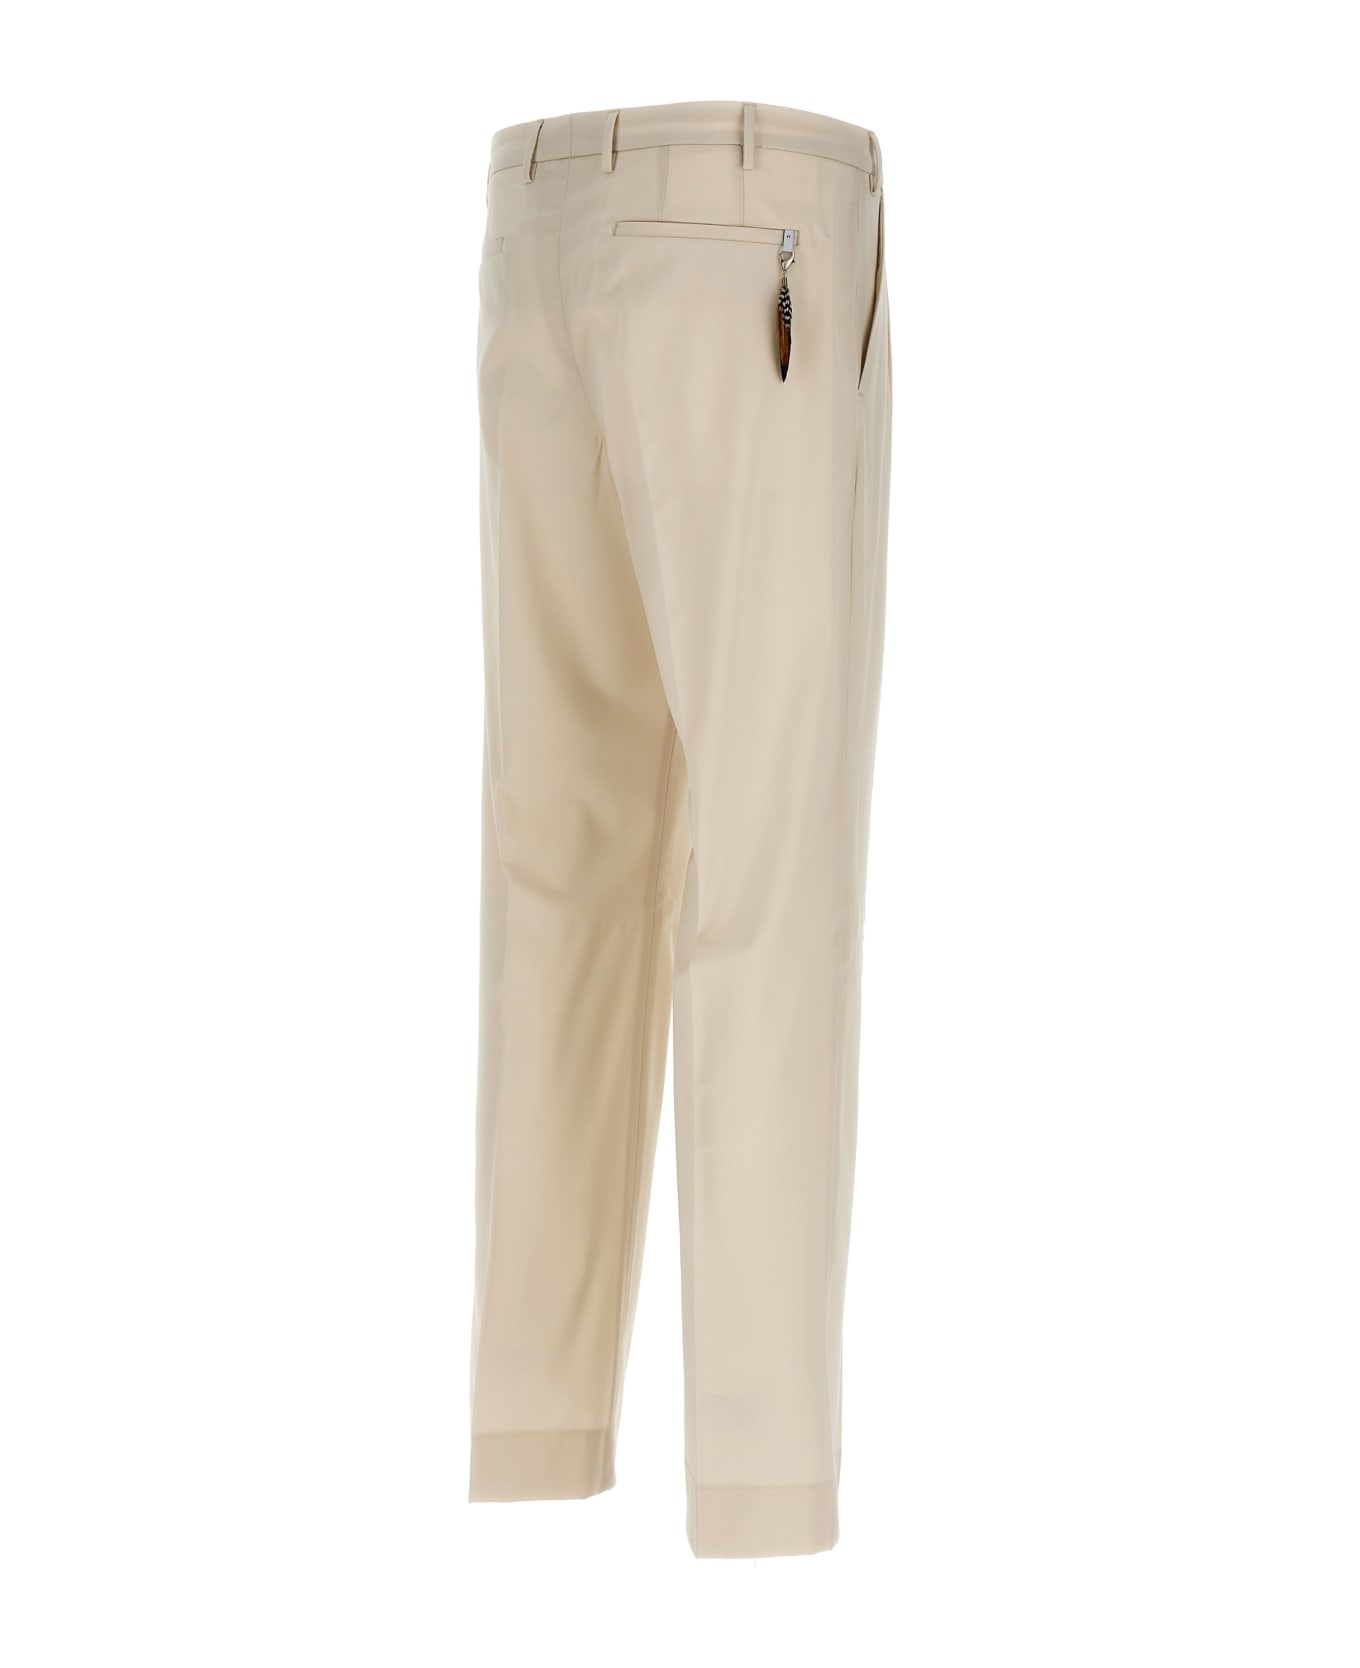 PT01 'diciannove' Pants - White